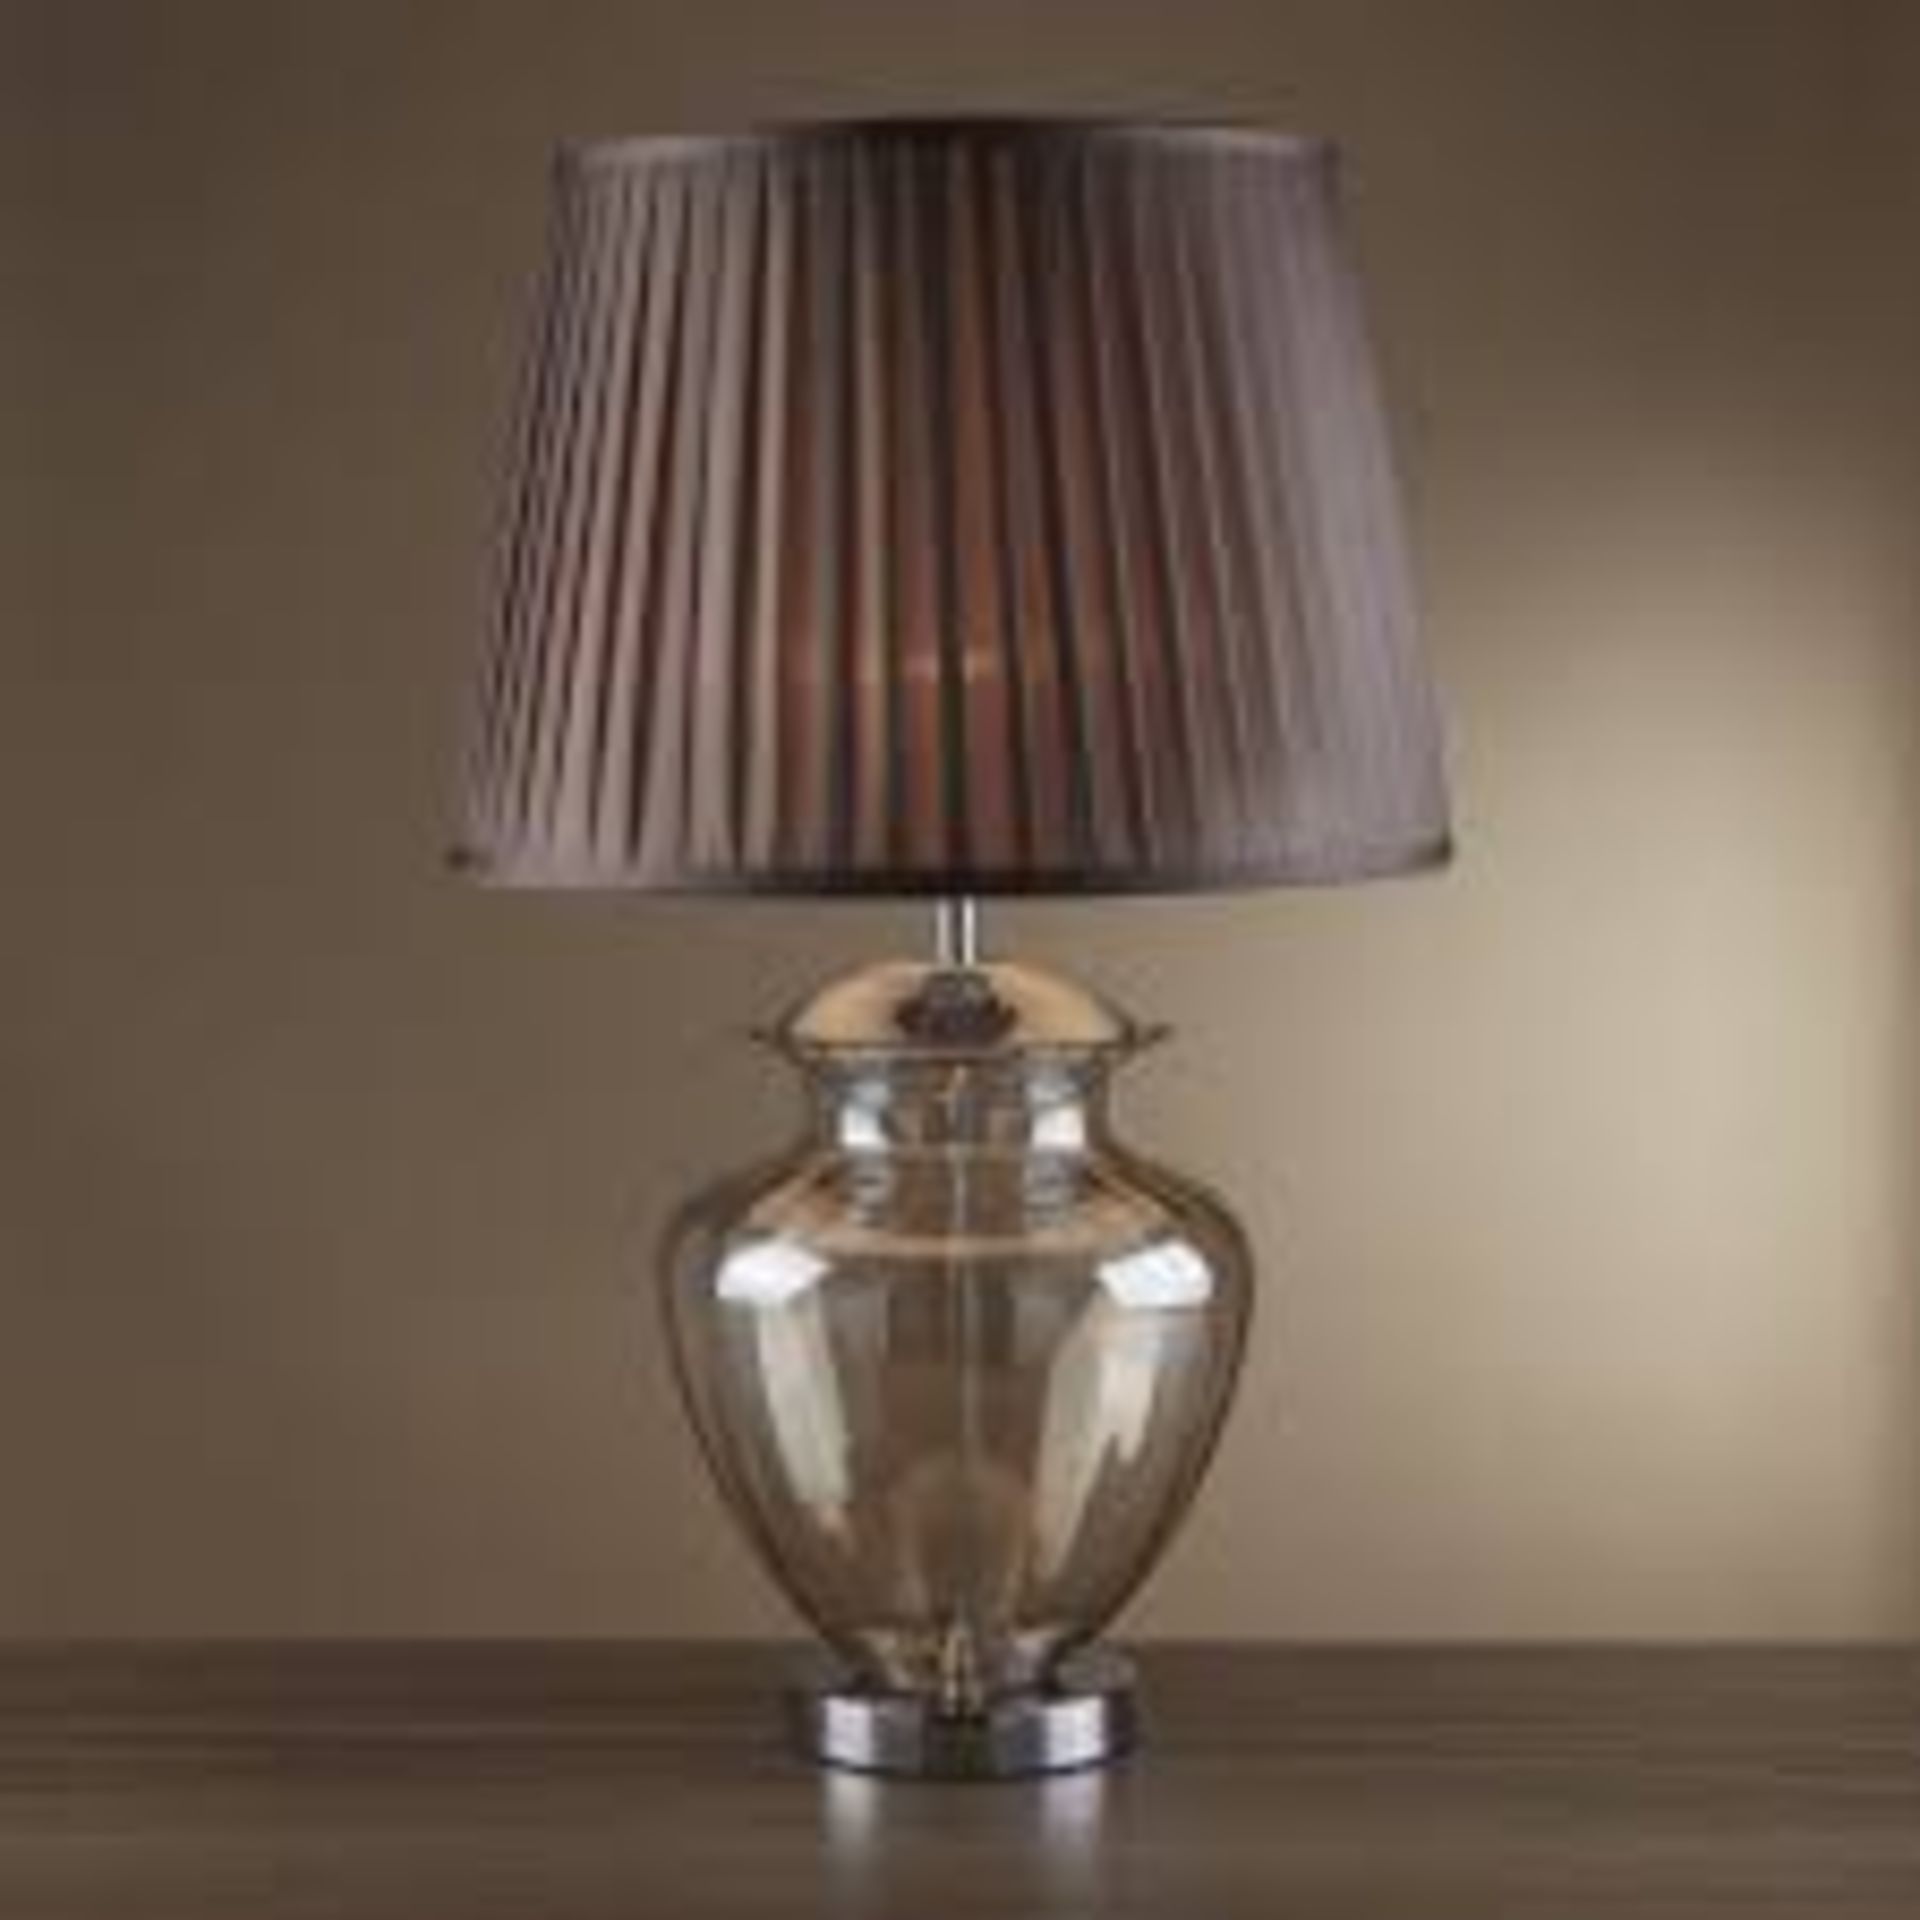 1 x Searchlight Table Lamp in chrome - Ref: 8531AM - New and Boxed - RRP: £180 - Image 4 of 4